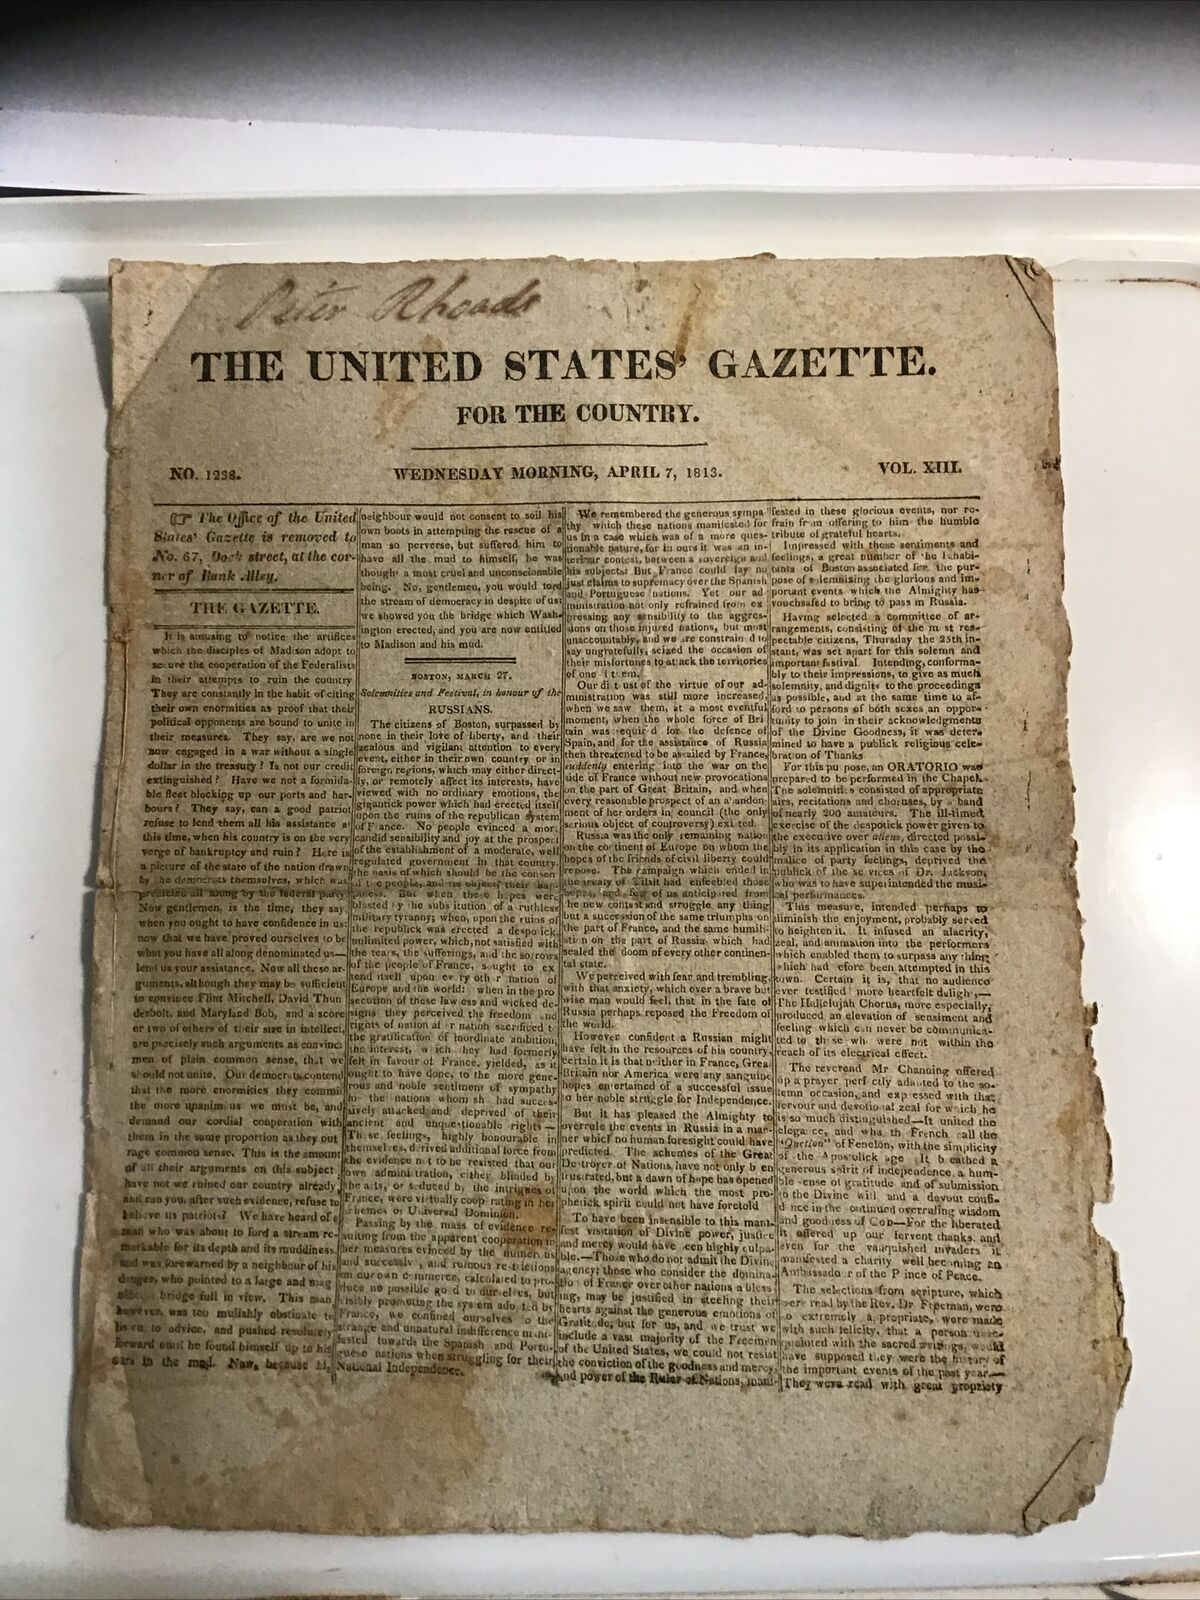 The United States Gazette Wed. April 7, 1813 Vol. XIII for (Judge) Peter Rhoads